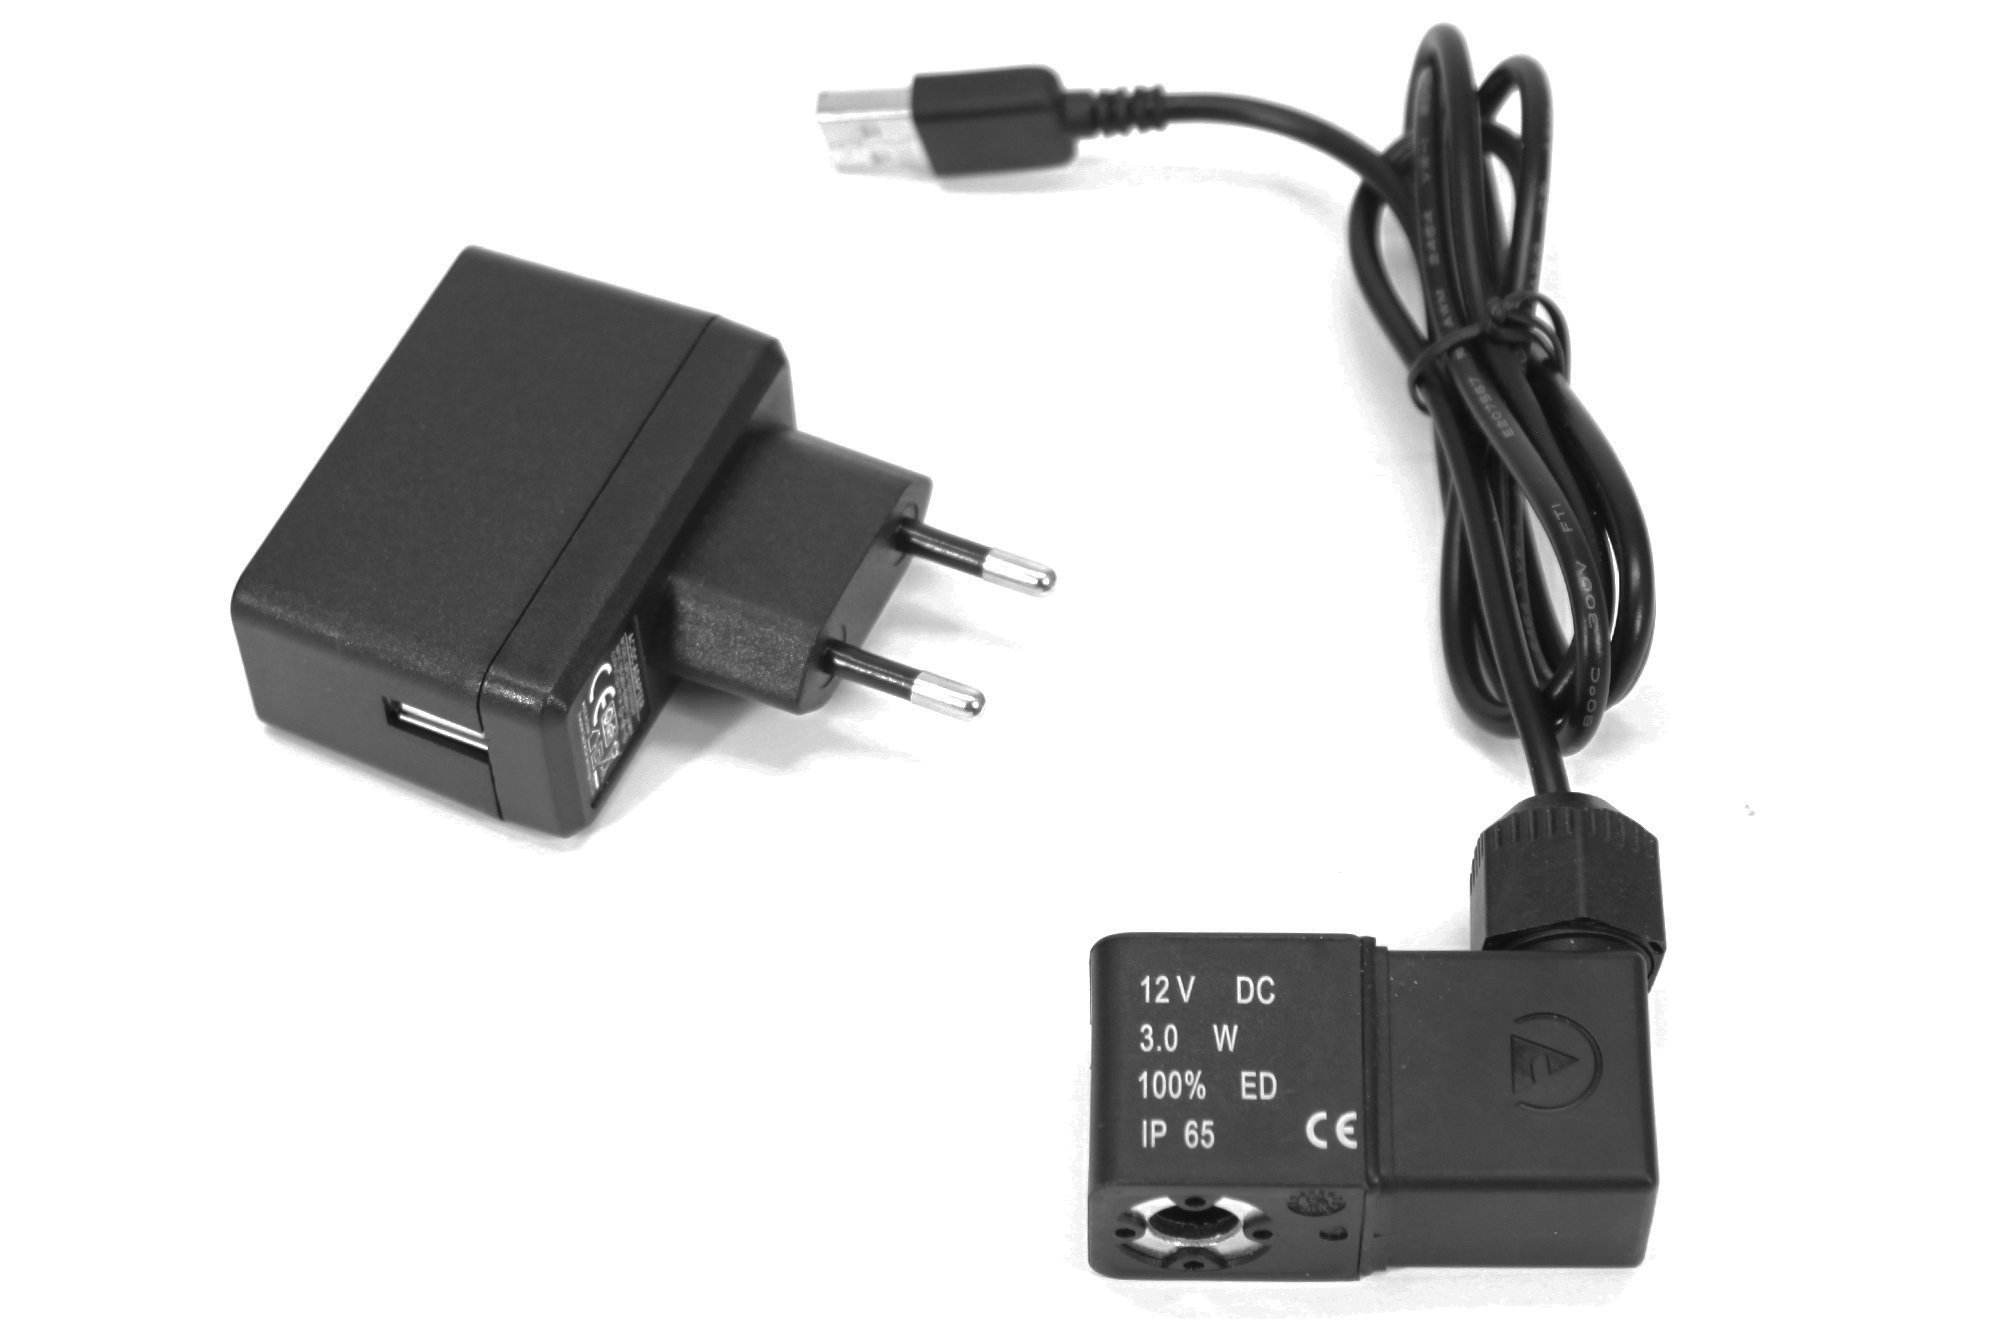 12v DC USB Solenoid coil and Euro transformer